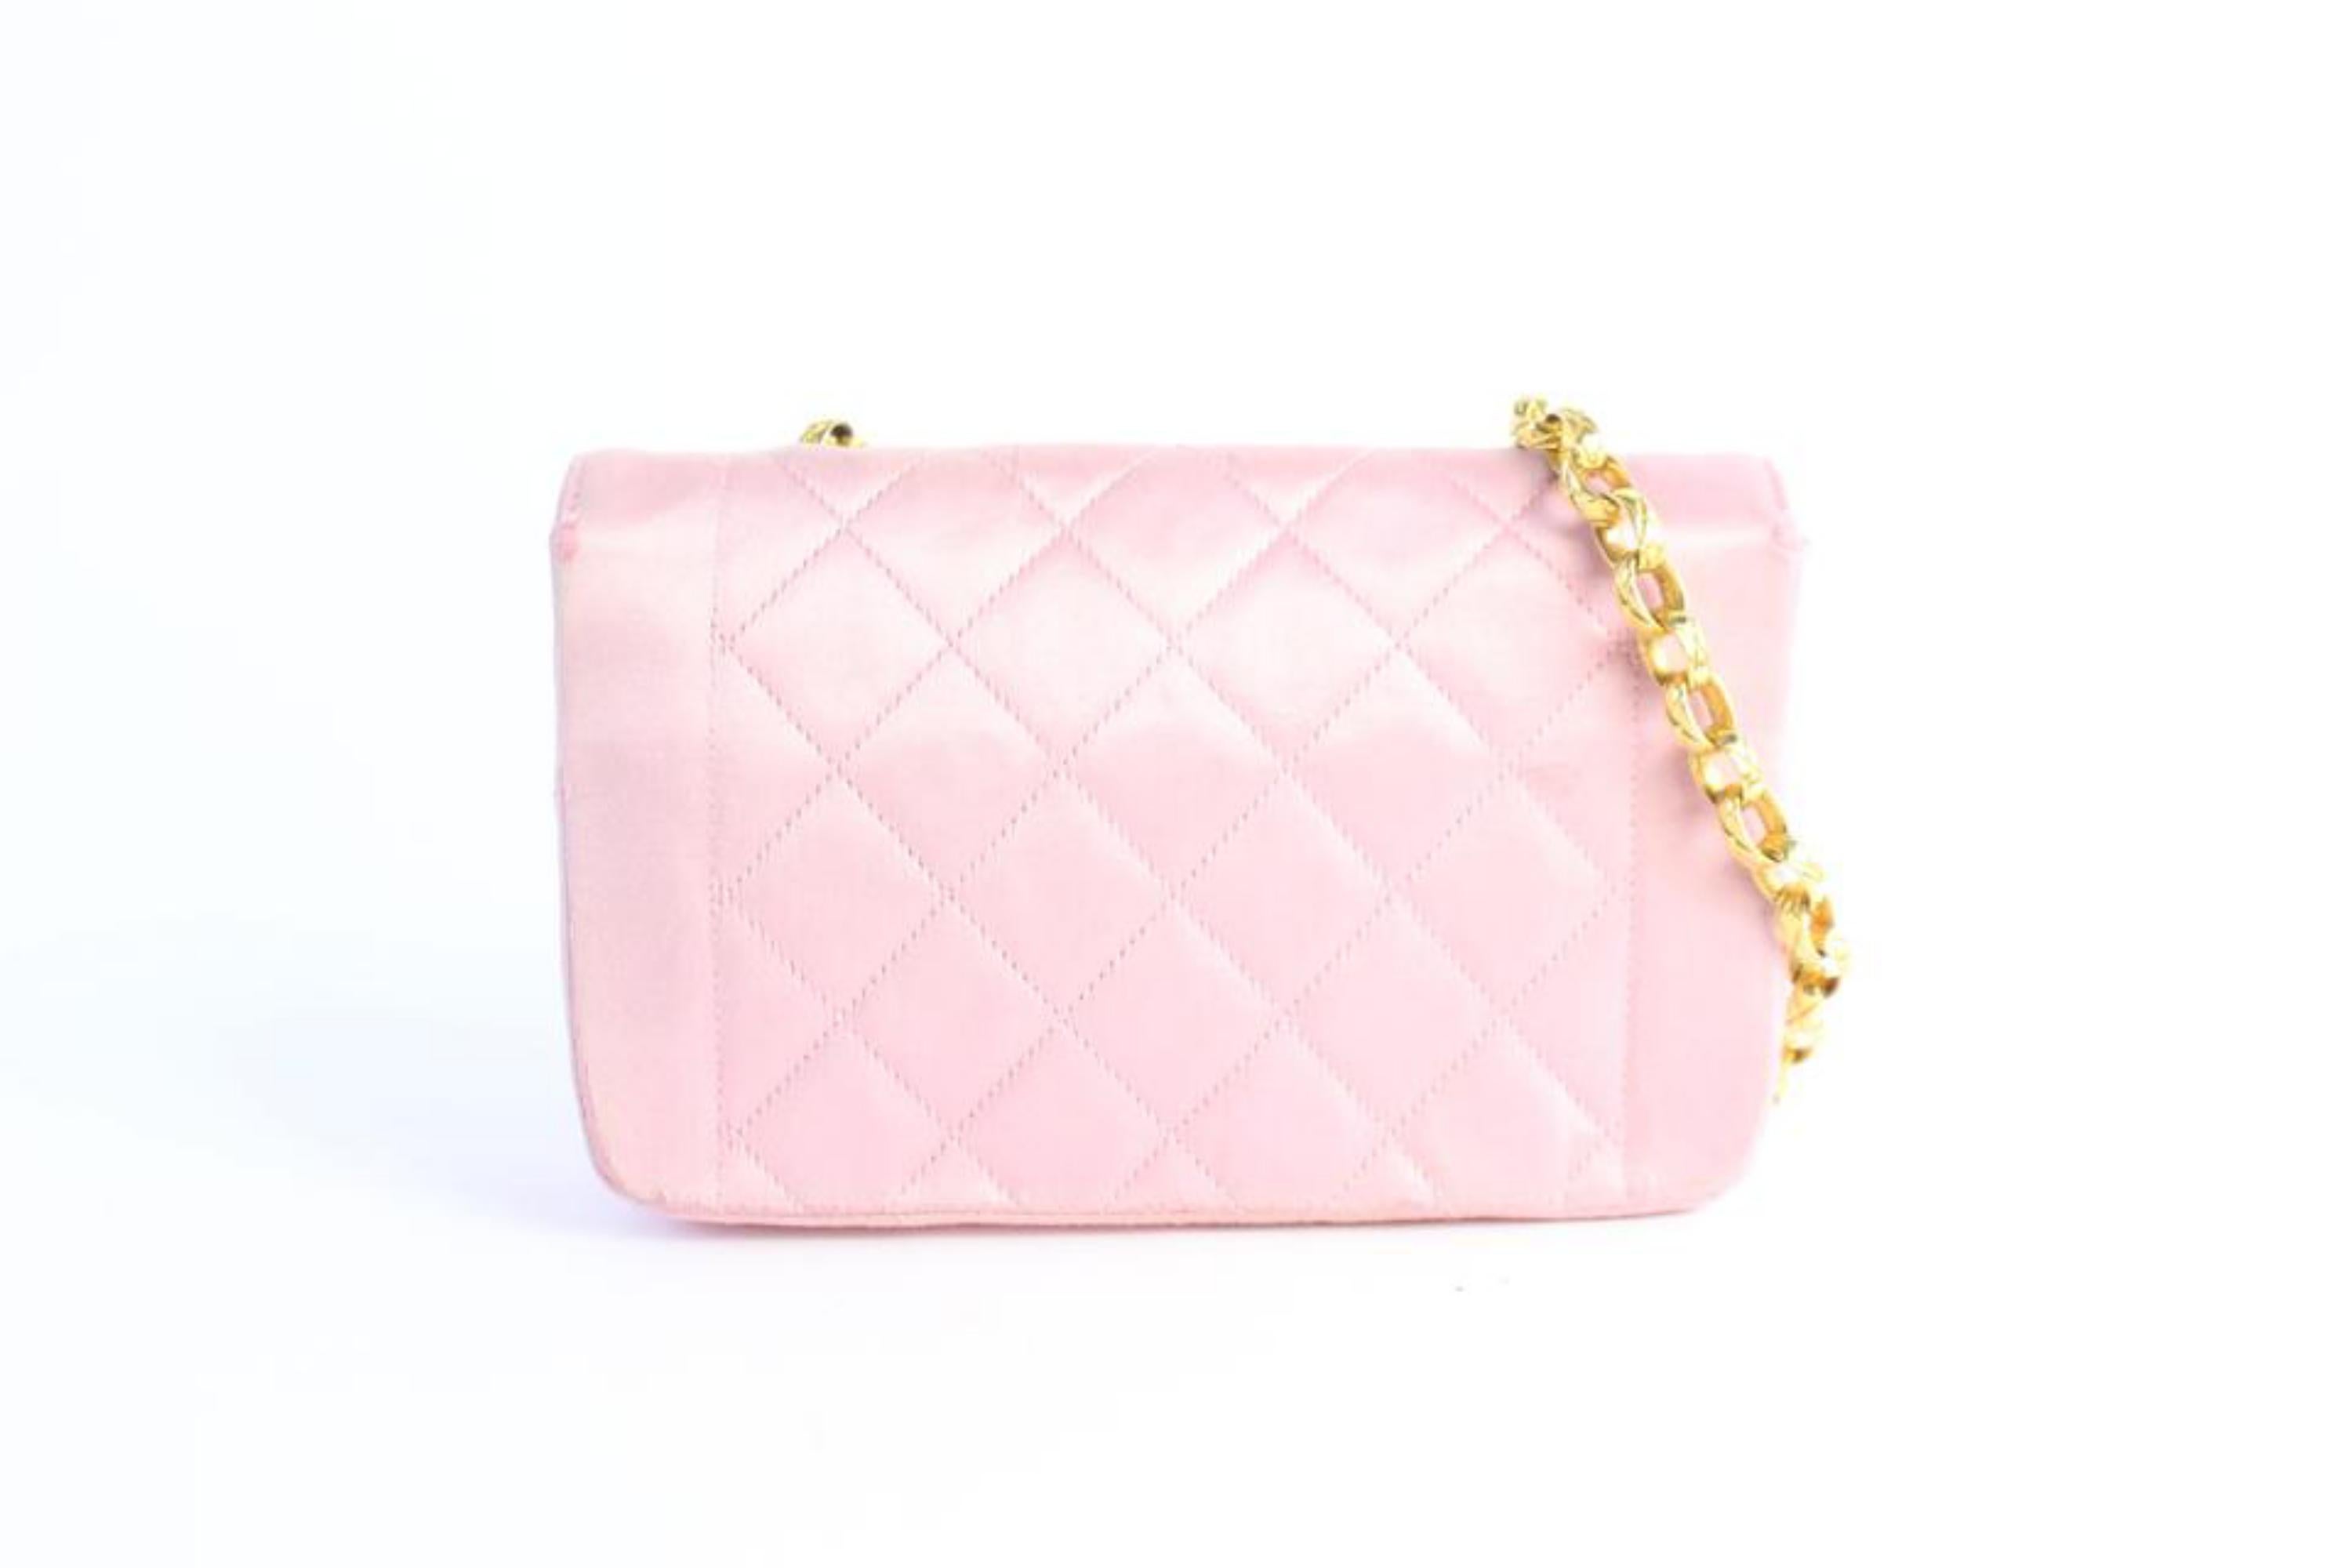 Chanel Diana Quilted Flap 4cz0821 Pink Satin Cross Body Bag For Sale 3